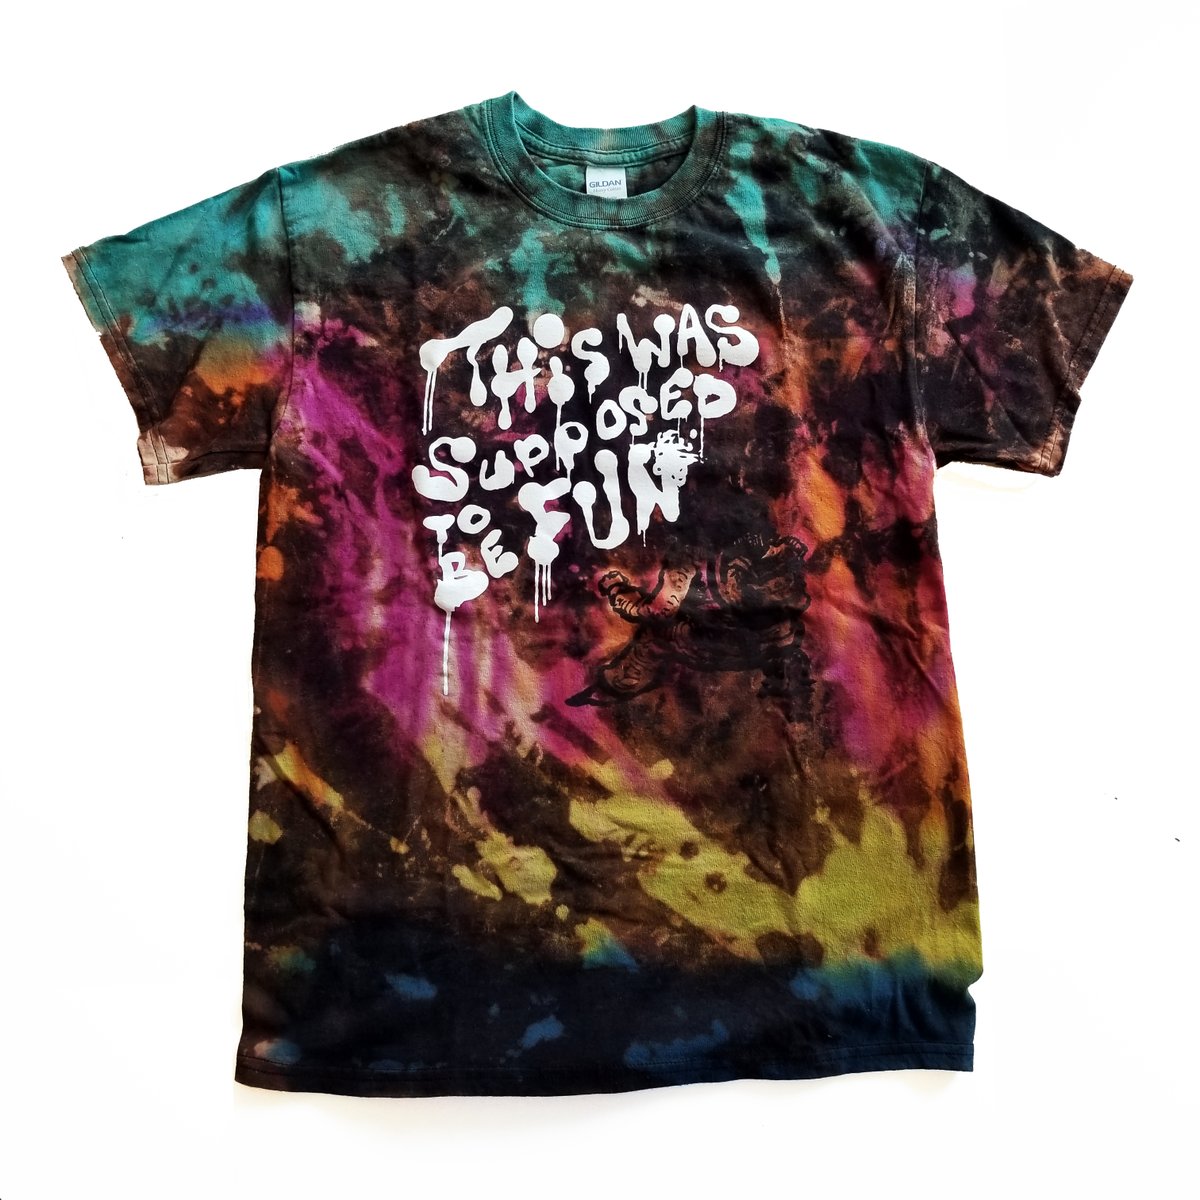 NEW @EpicBeardMen TIE DYE Tees! These VERY limited shirts (1 of ea Men's size, 2 of ea Women's) were hand-dyed by the mighty @cayleighbahlarg to celebrate the 1st anniversary of #ThisWasSupposedToBeFun! Get 'em here w/ a free CD: tinyurl.com/TWSTBFTieDye